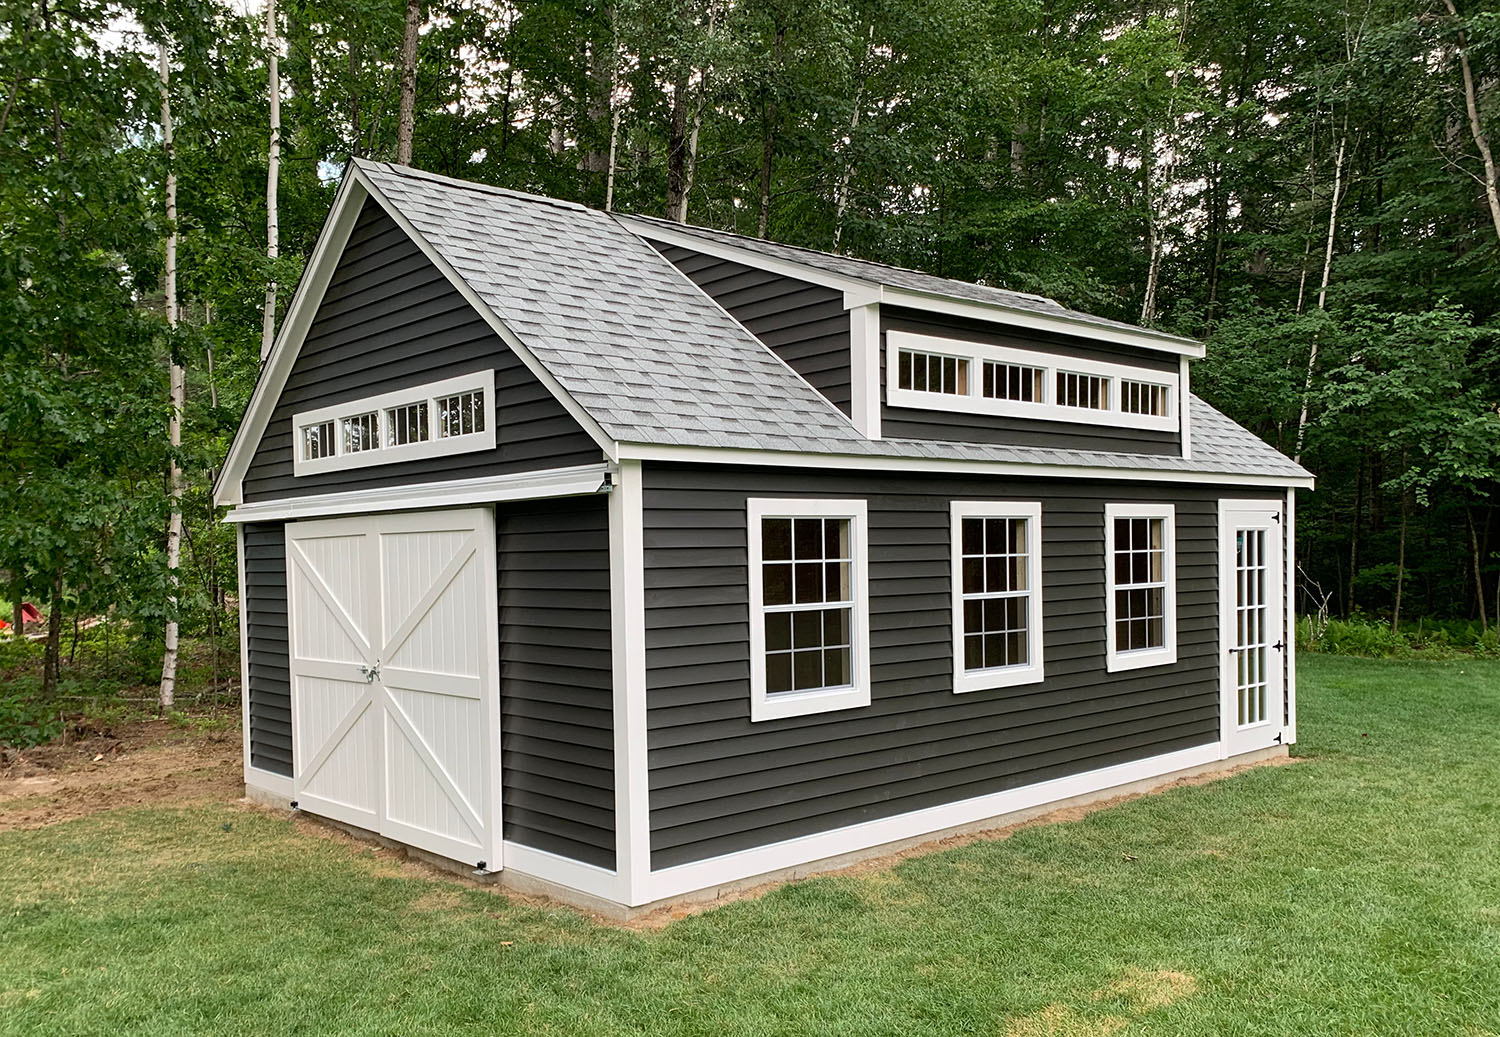 5 Must-Have Features for Your Office Shed